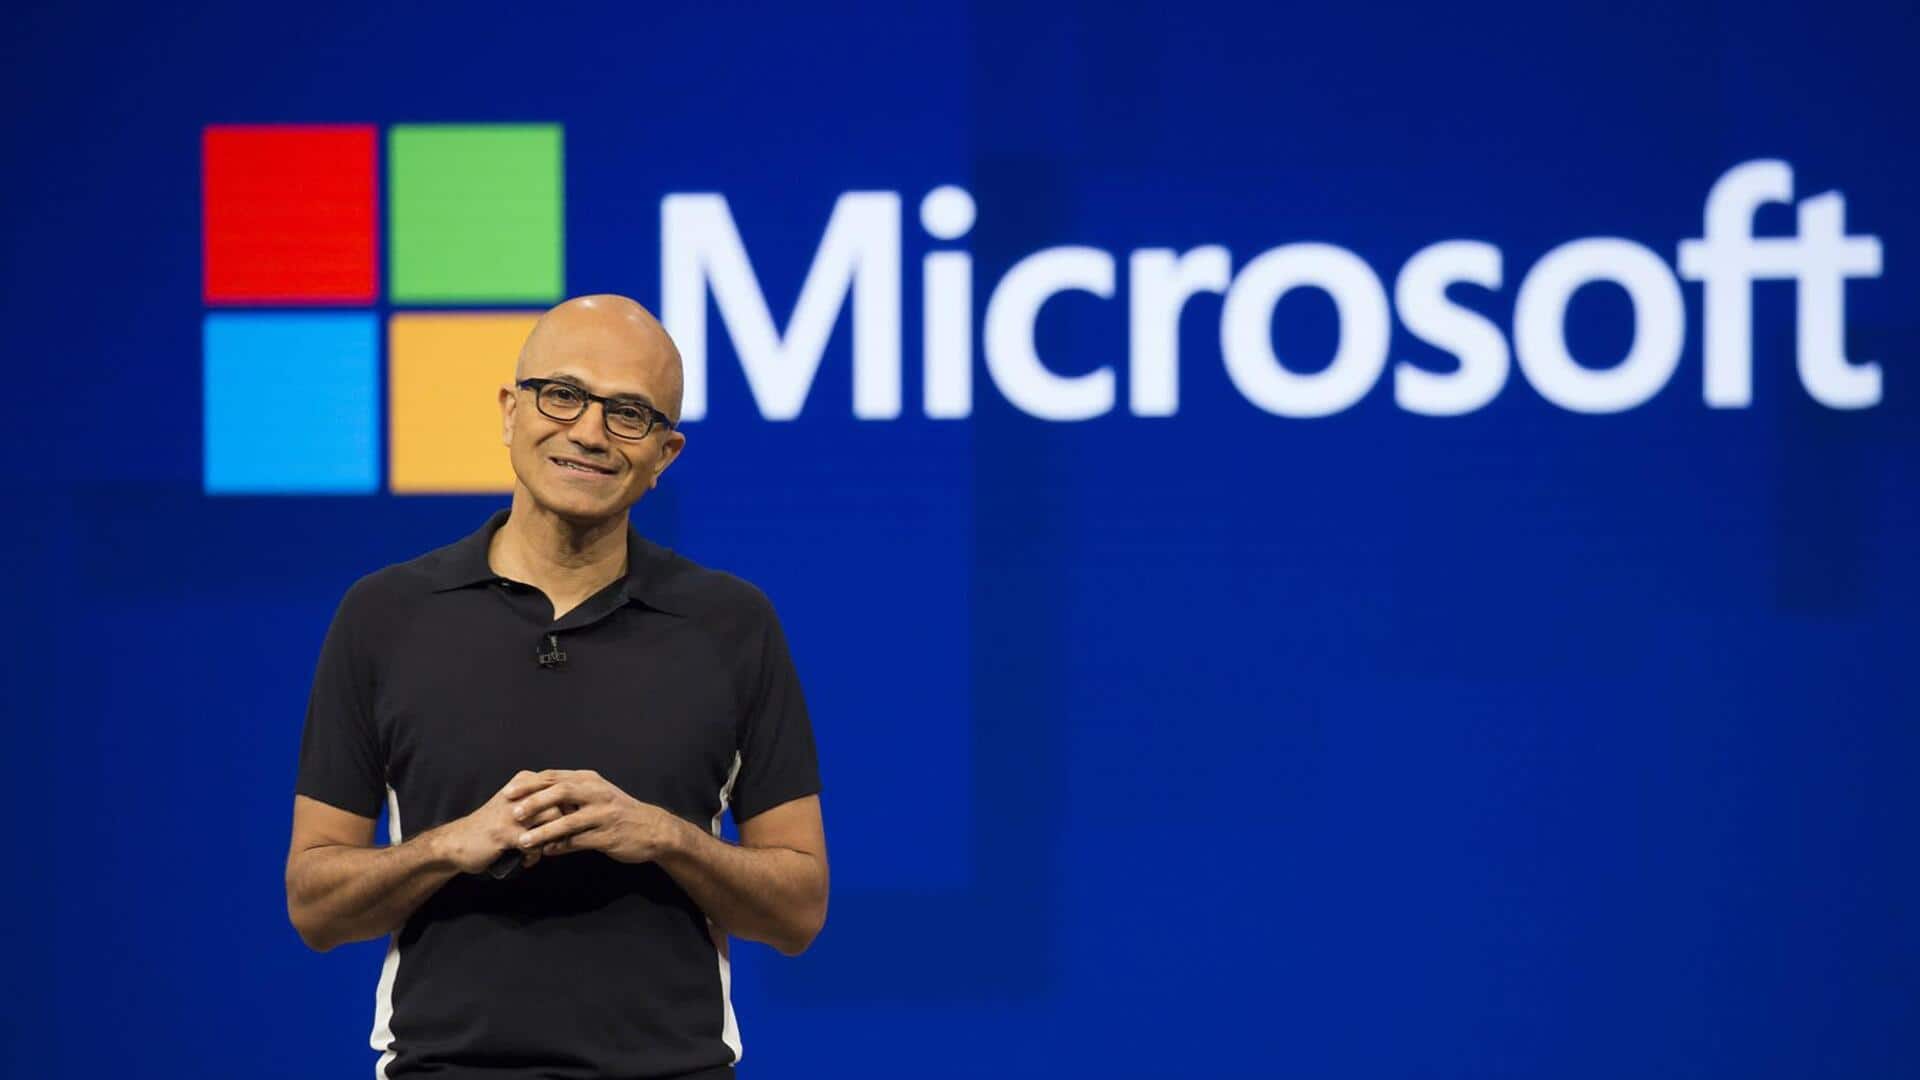 Microsoft CEO to visit India in February, focus on AI